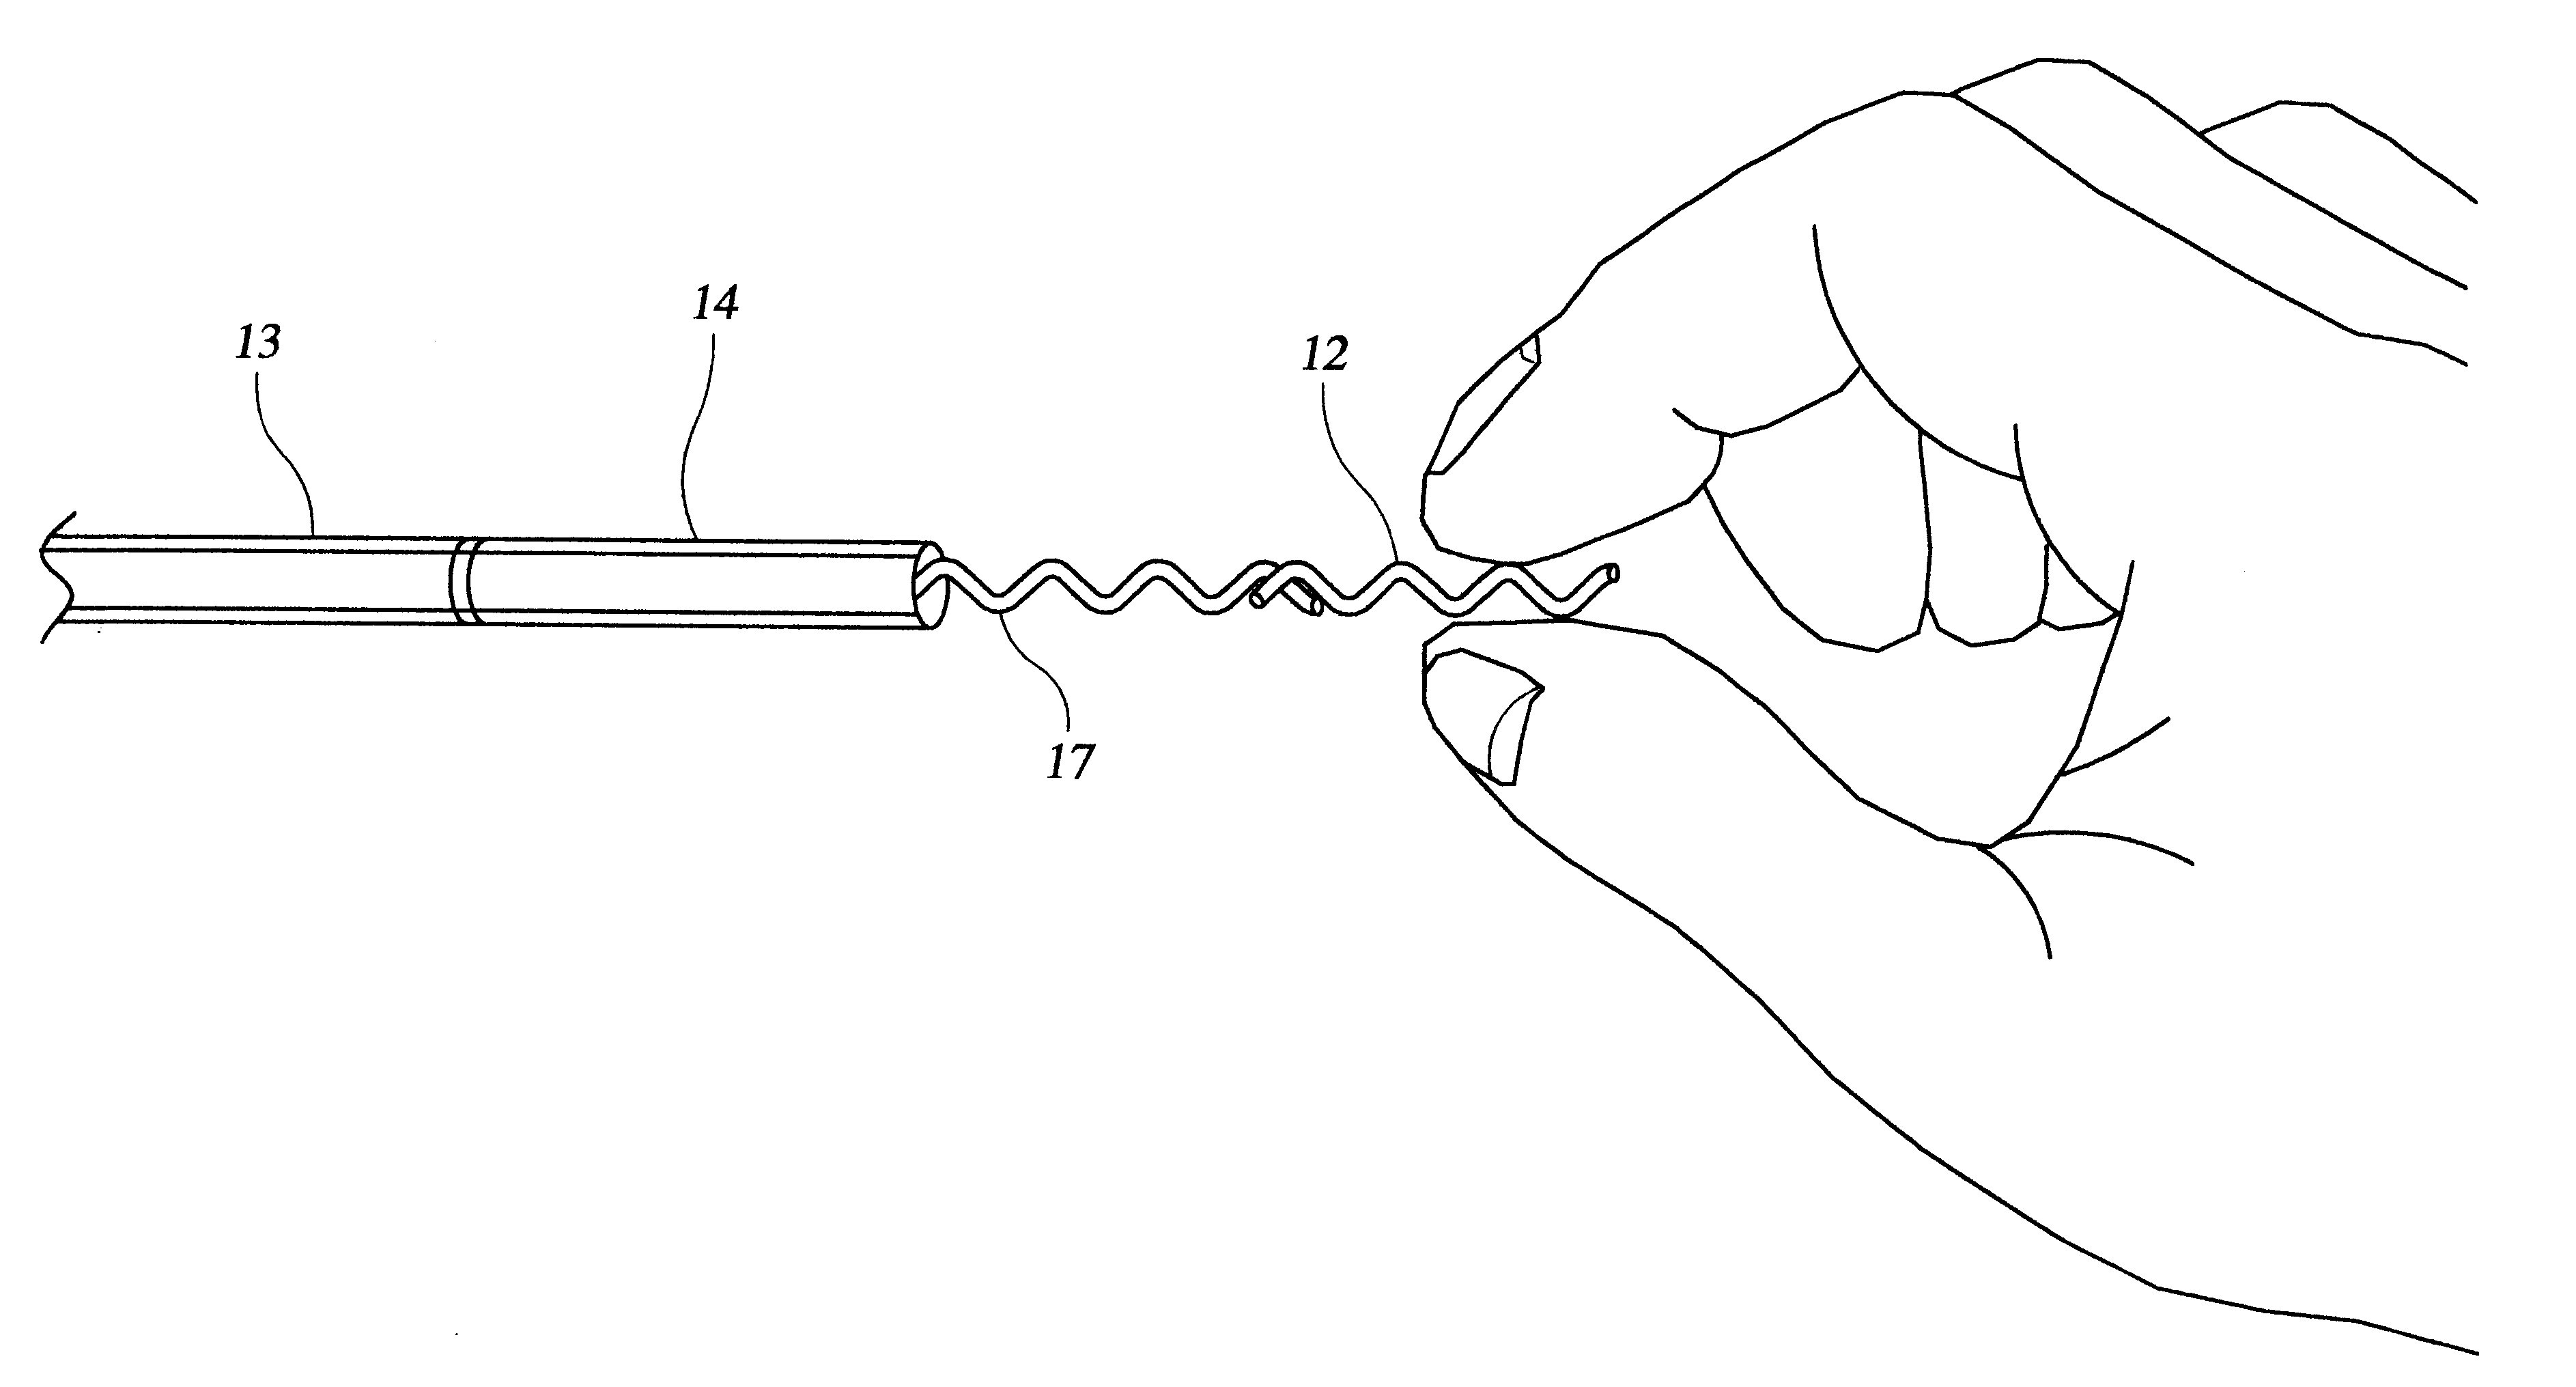 Implant delivery catheter system and methods for its use